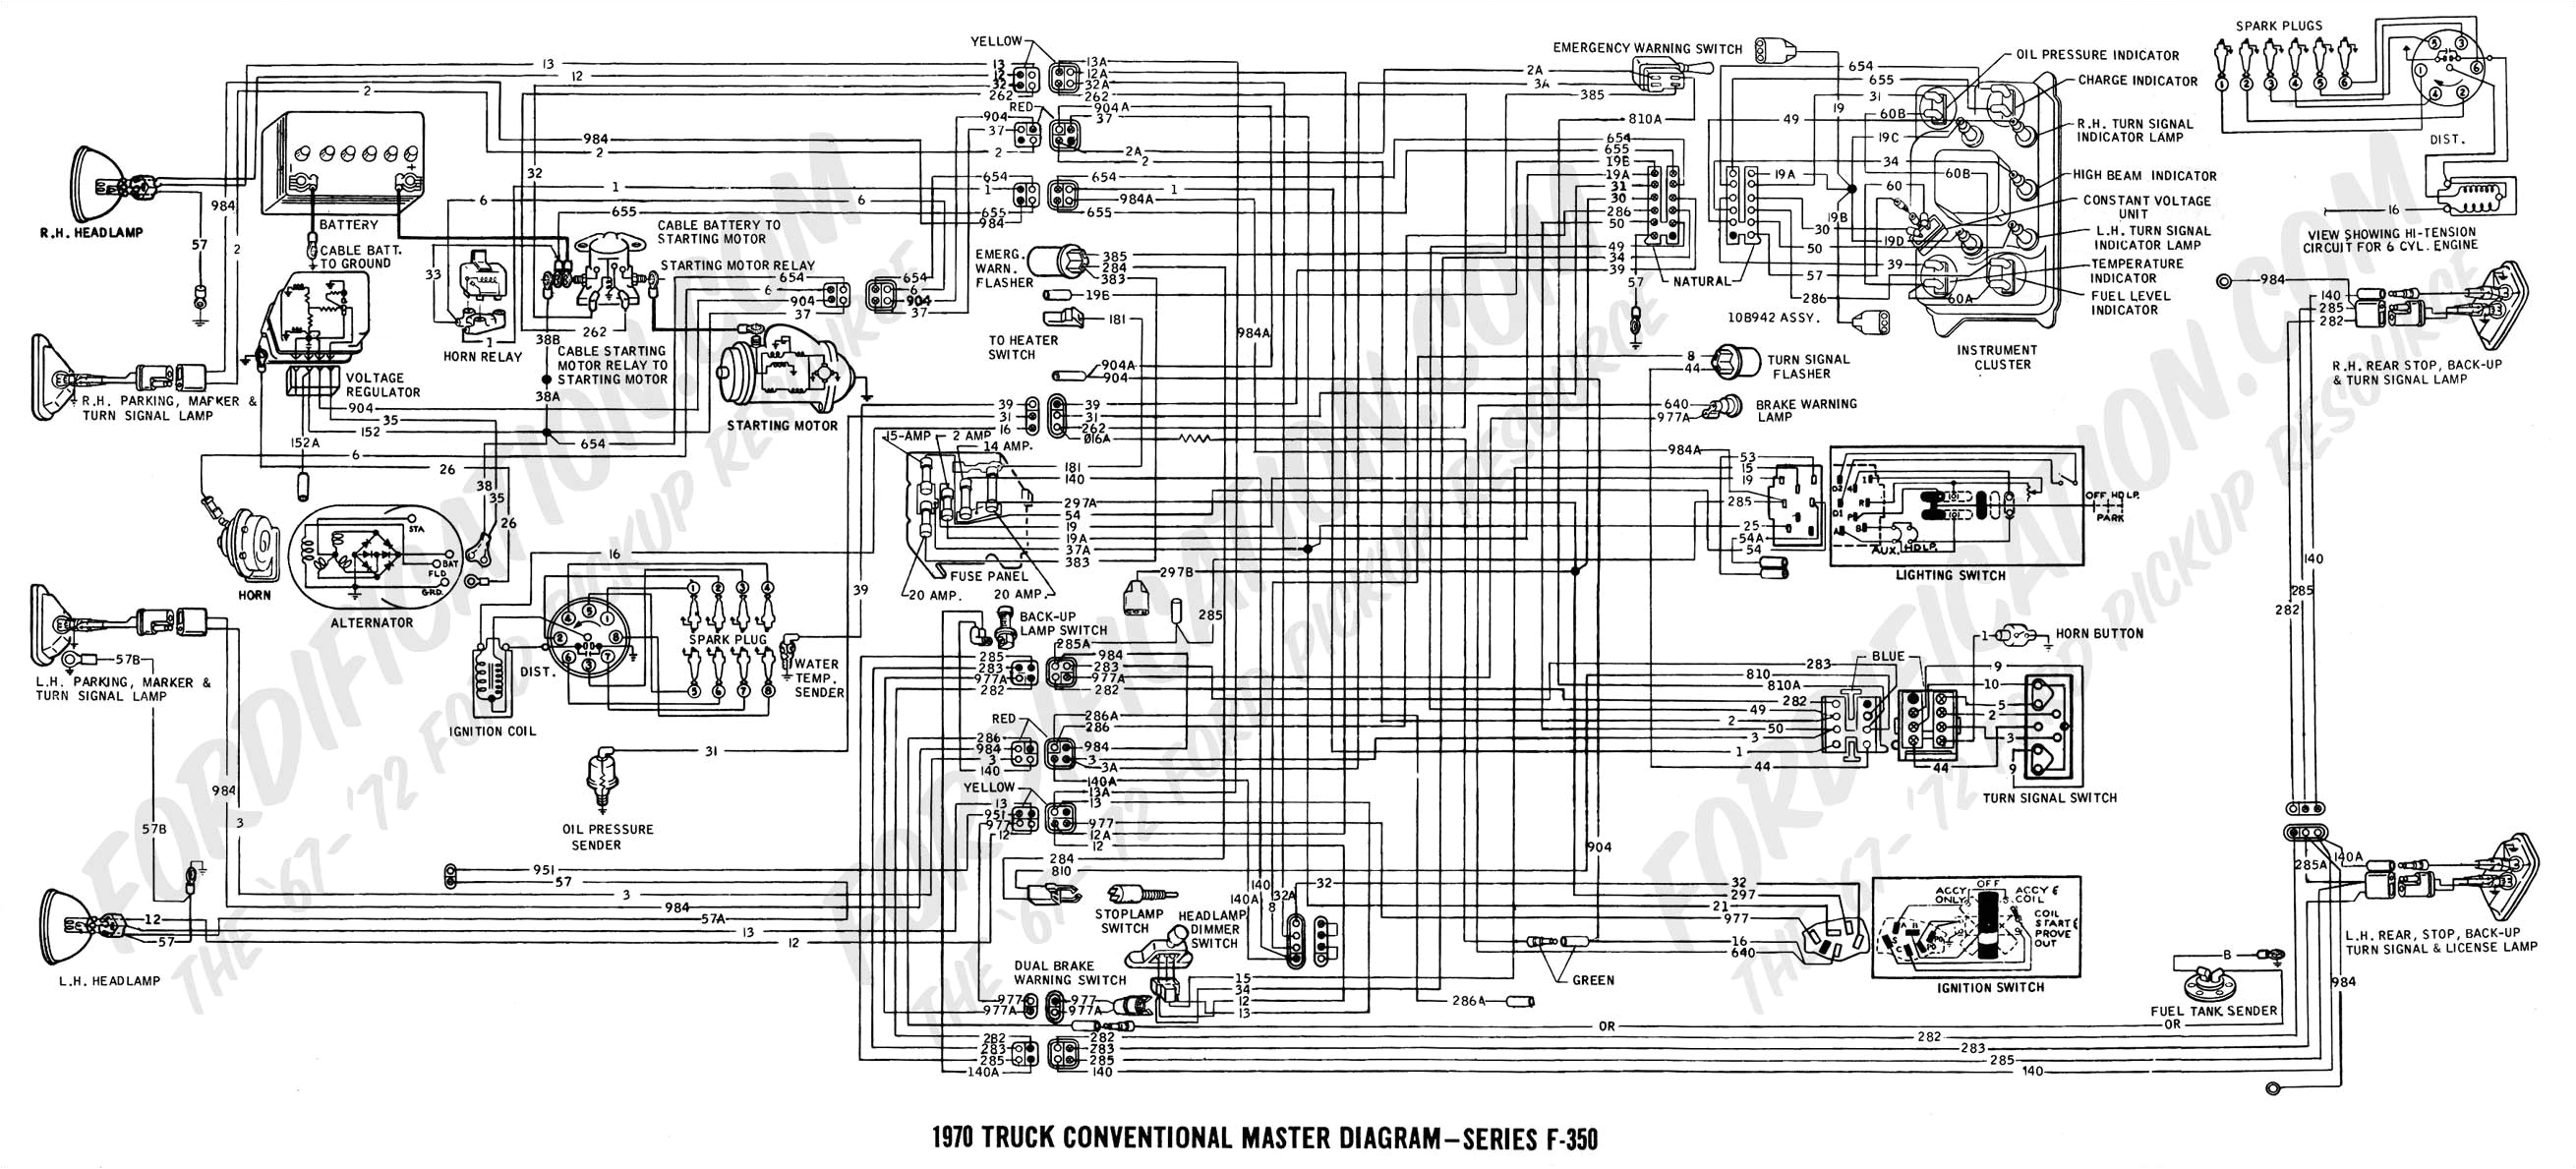 ford f350 wiring schematic wiring diagram img 2003 ford f250 electrical schematic 1995 ford f350 wiring